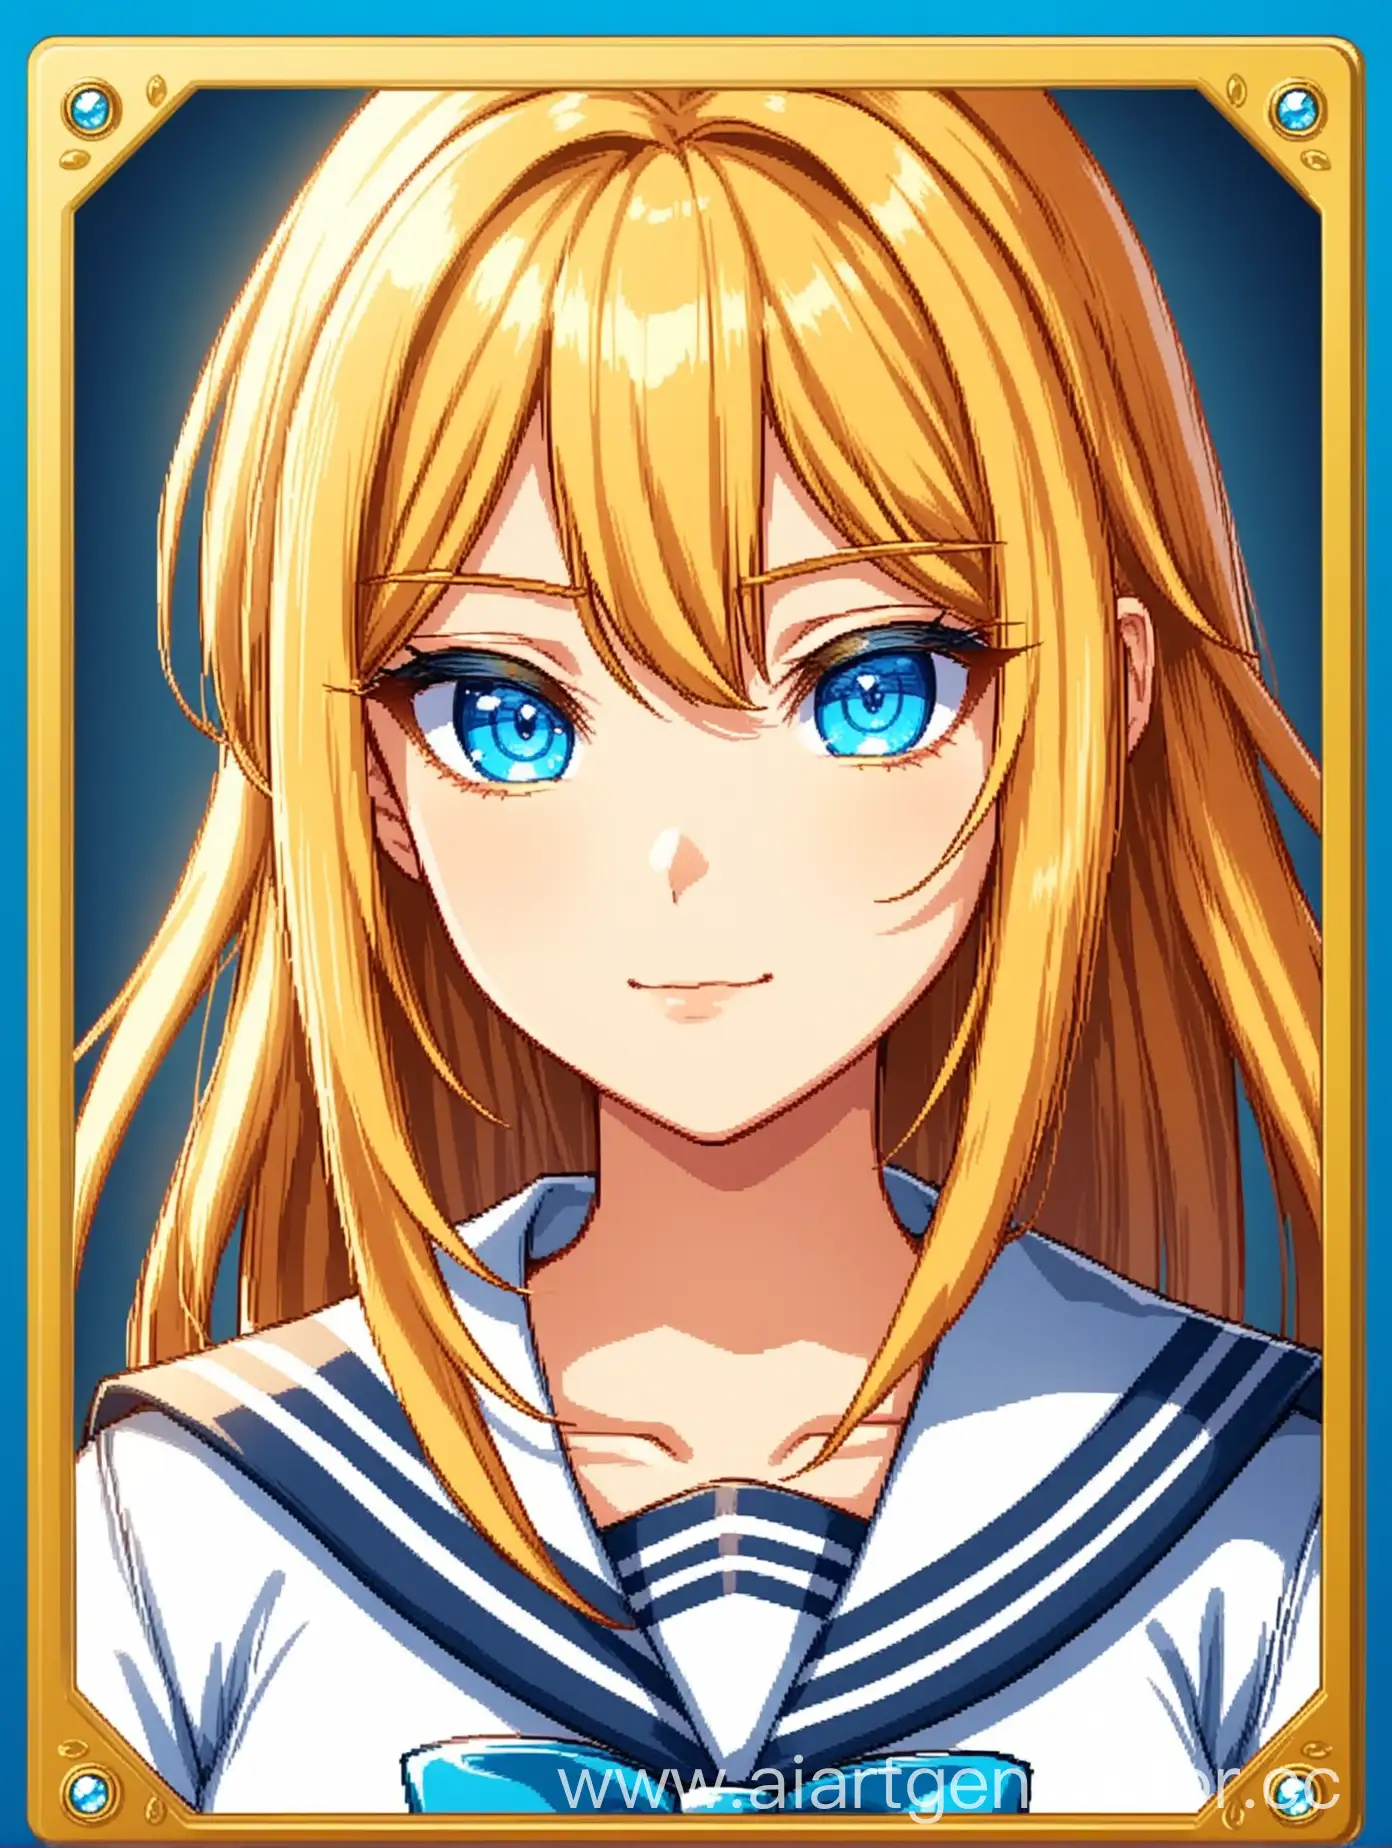 Anime-Sailor-Girl-with-Blue-Eyes-in-Golden-Frame-Orsk-Style-Avatar-for-Mobile-Game